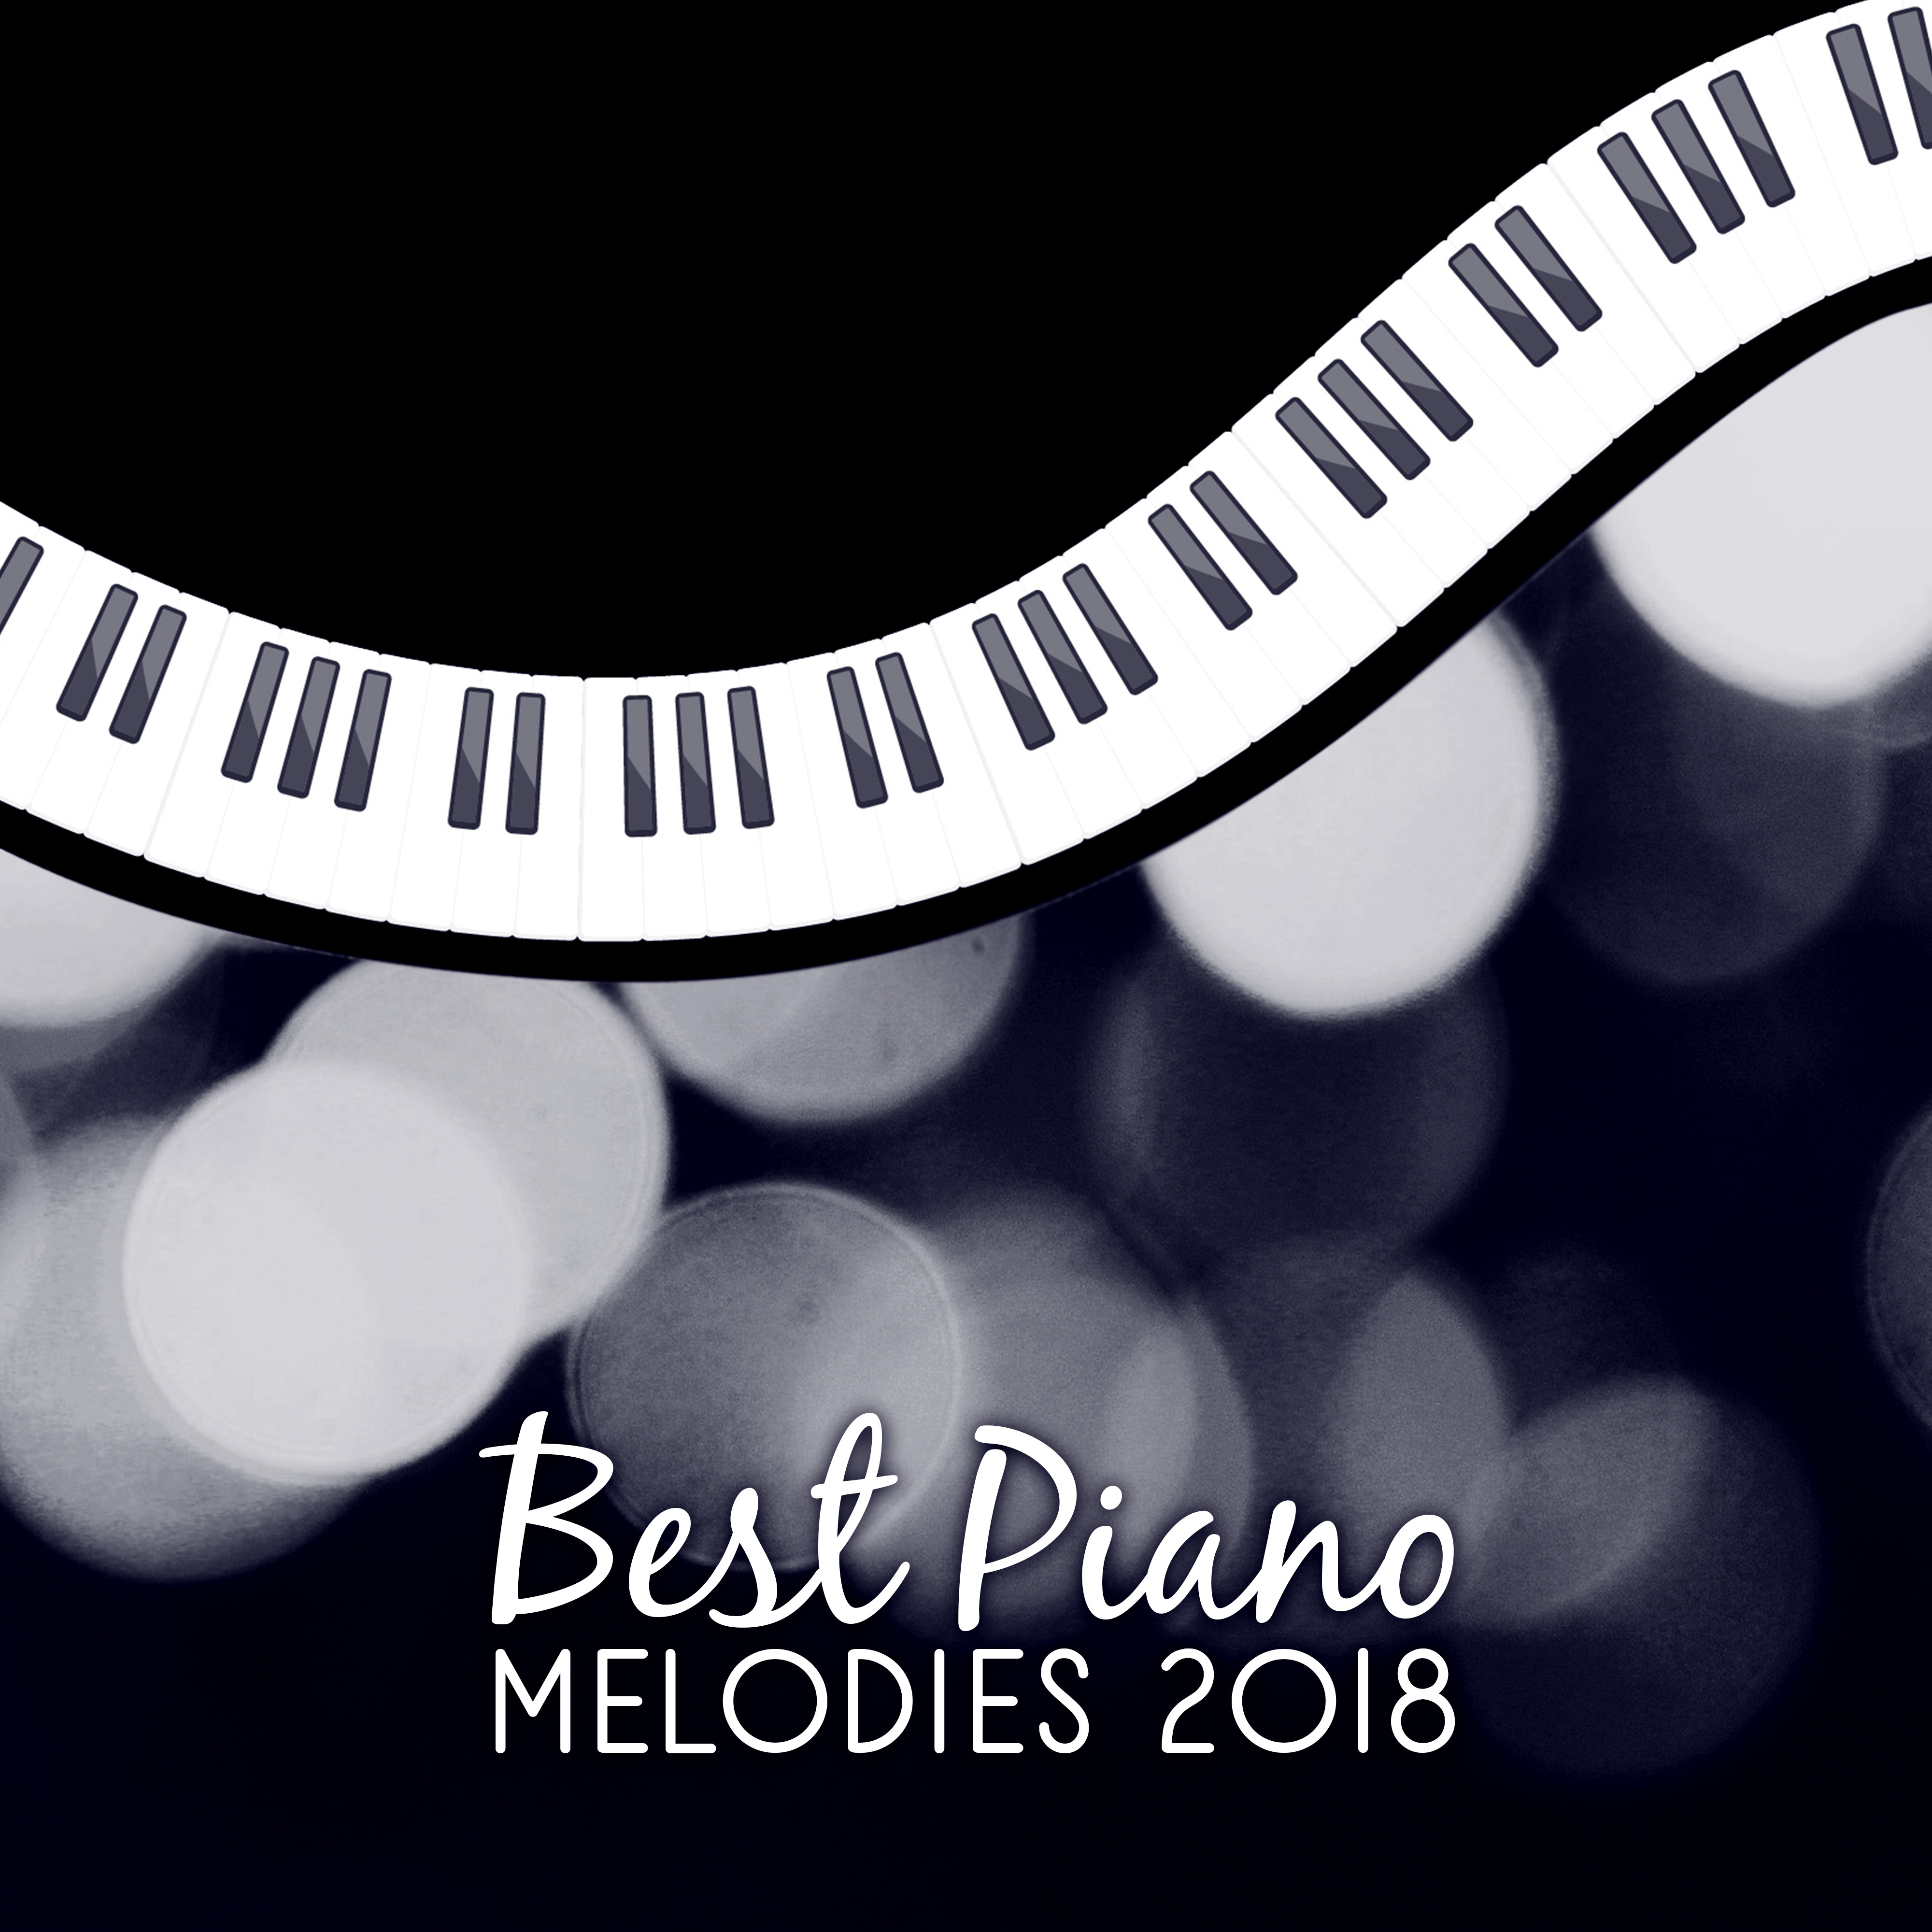 Best Piano Melodies 2018